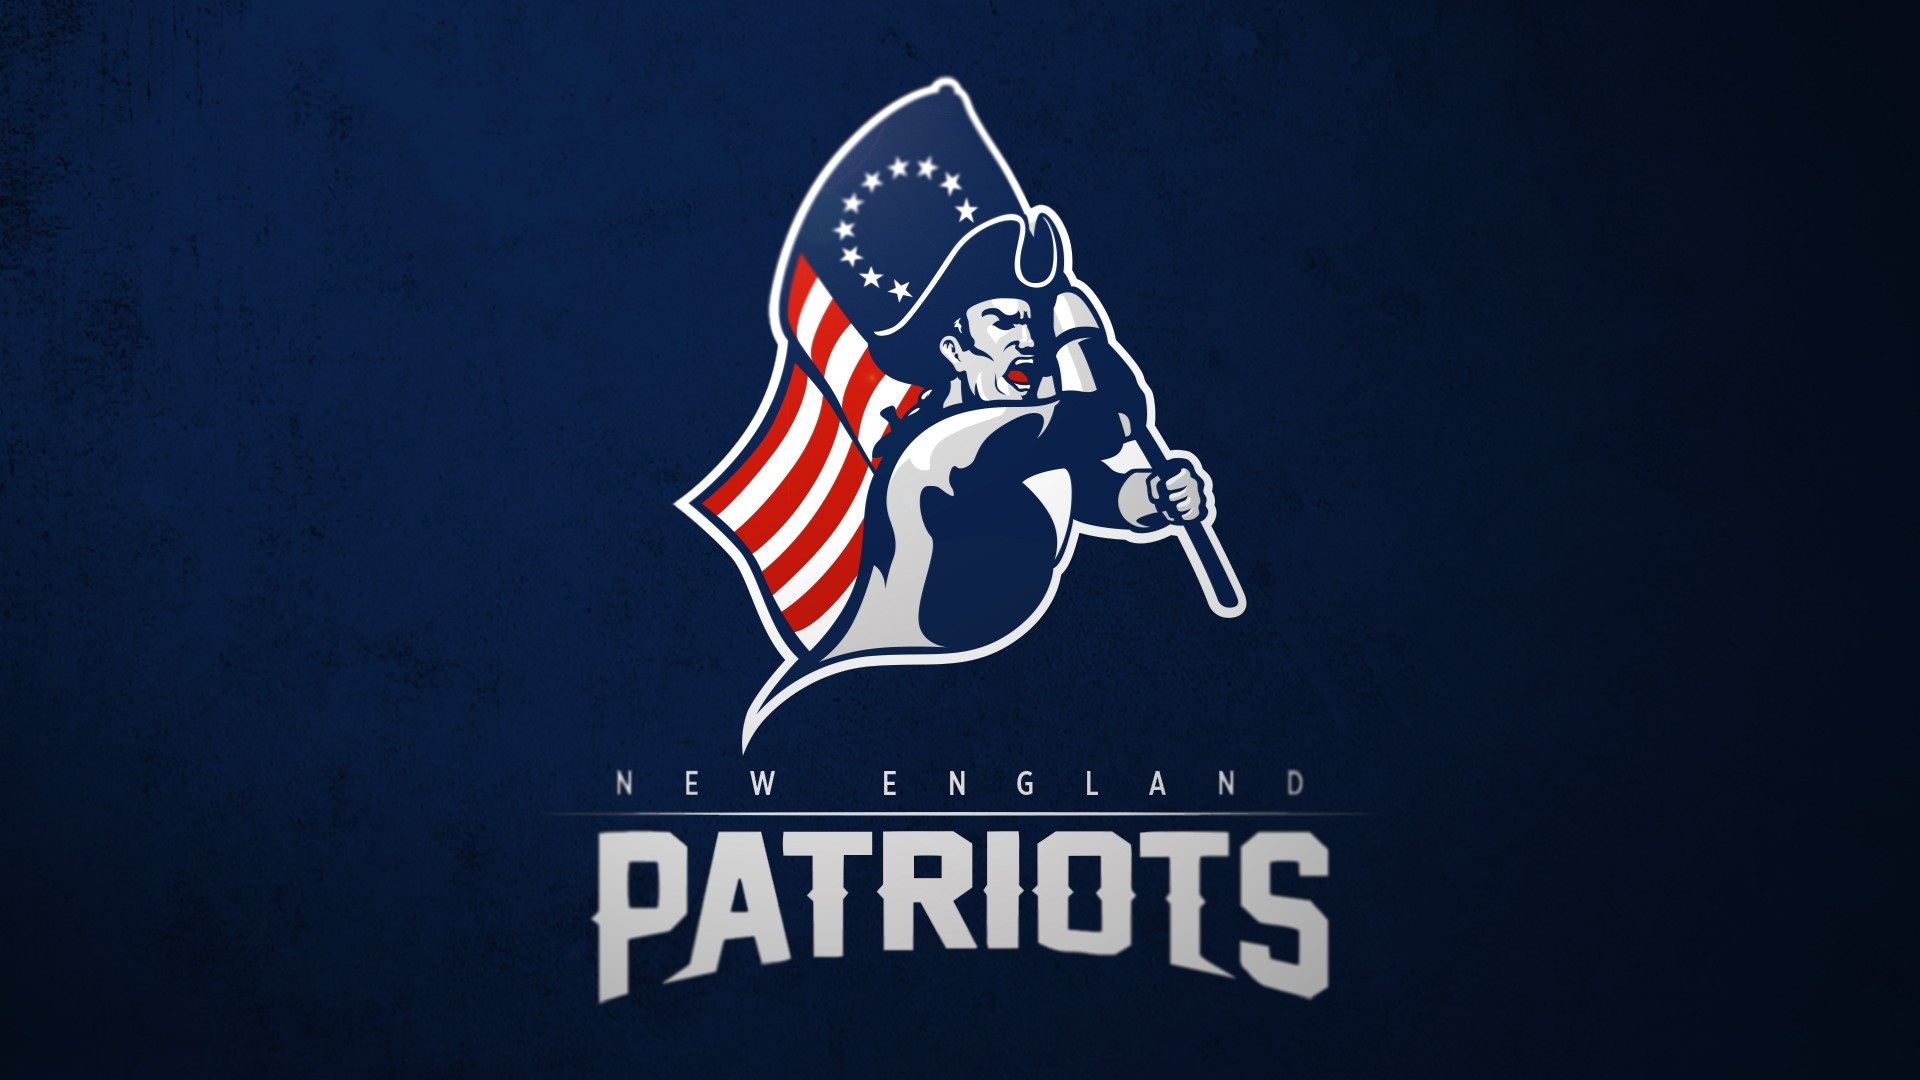 HD Backgrounds New England Patriots with resolution 1920x1080 pixel. You can make this wallpaper for your Mac or Windows Desktop Background, iPhone, Android or Tablet and another Smartphone device